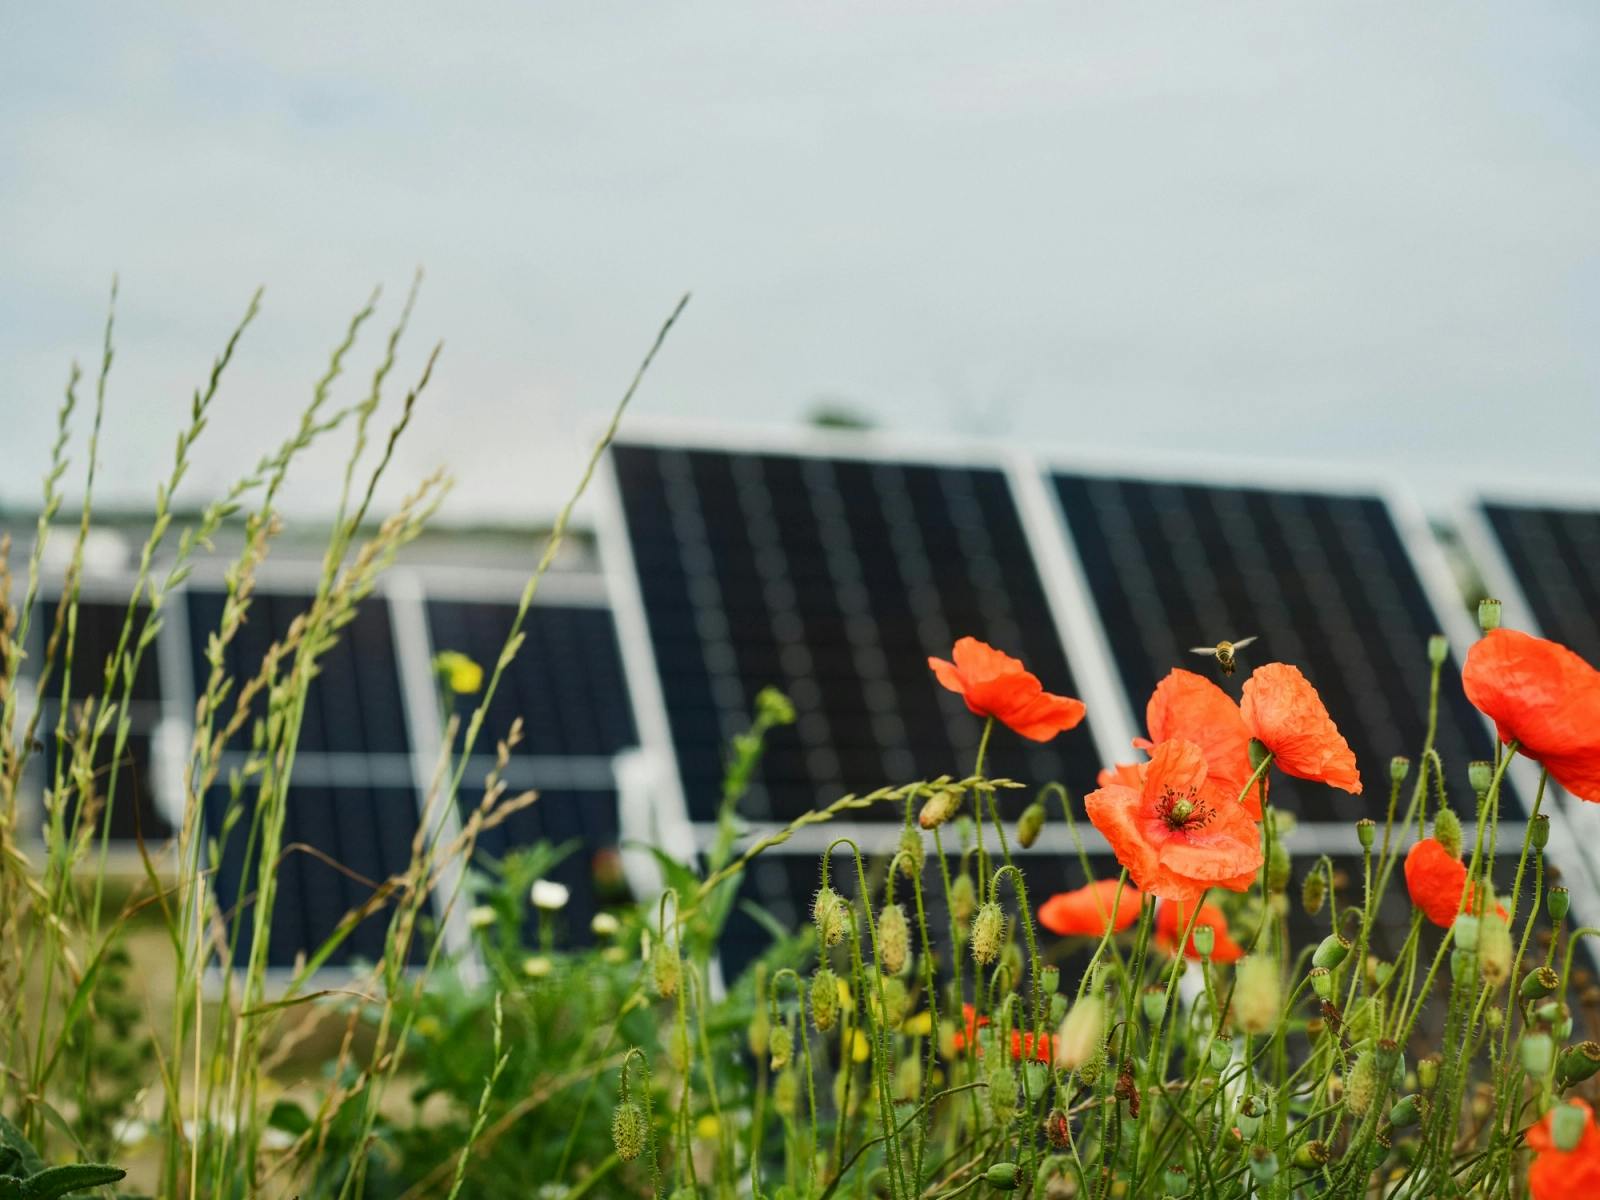 New credit agreement between Nordic Solar and Jyske Bank supporting energised Højby solar park